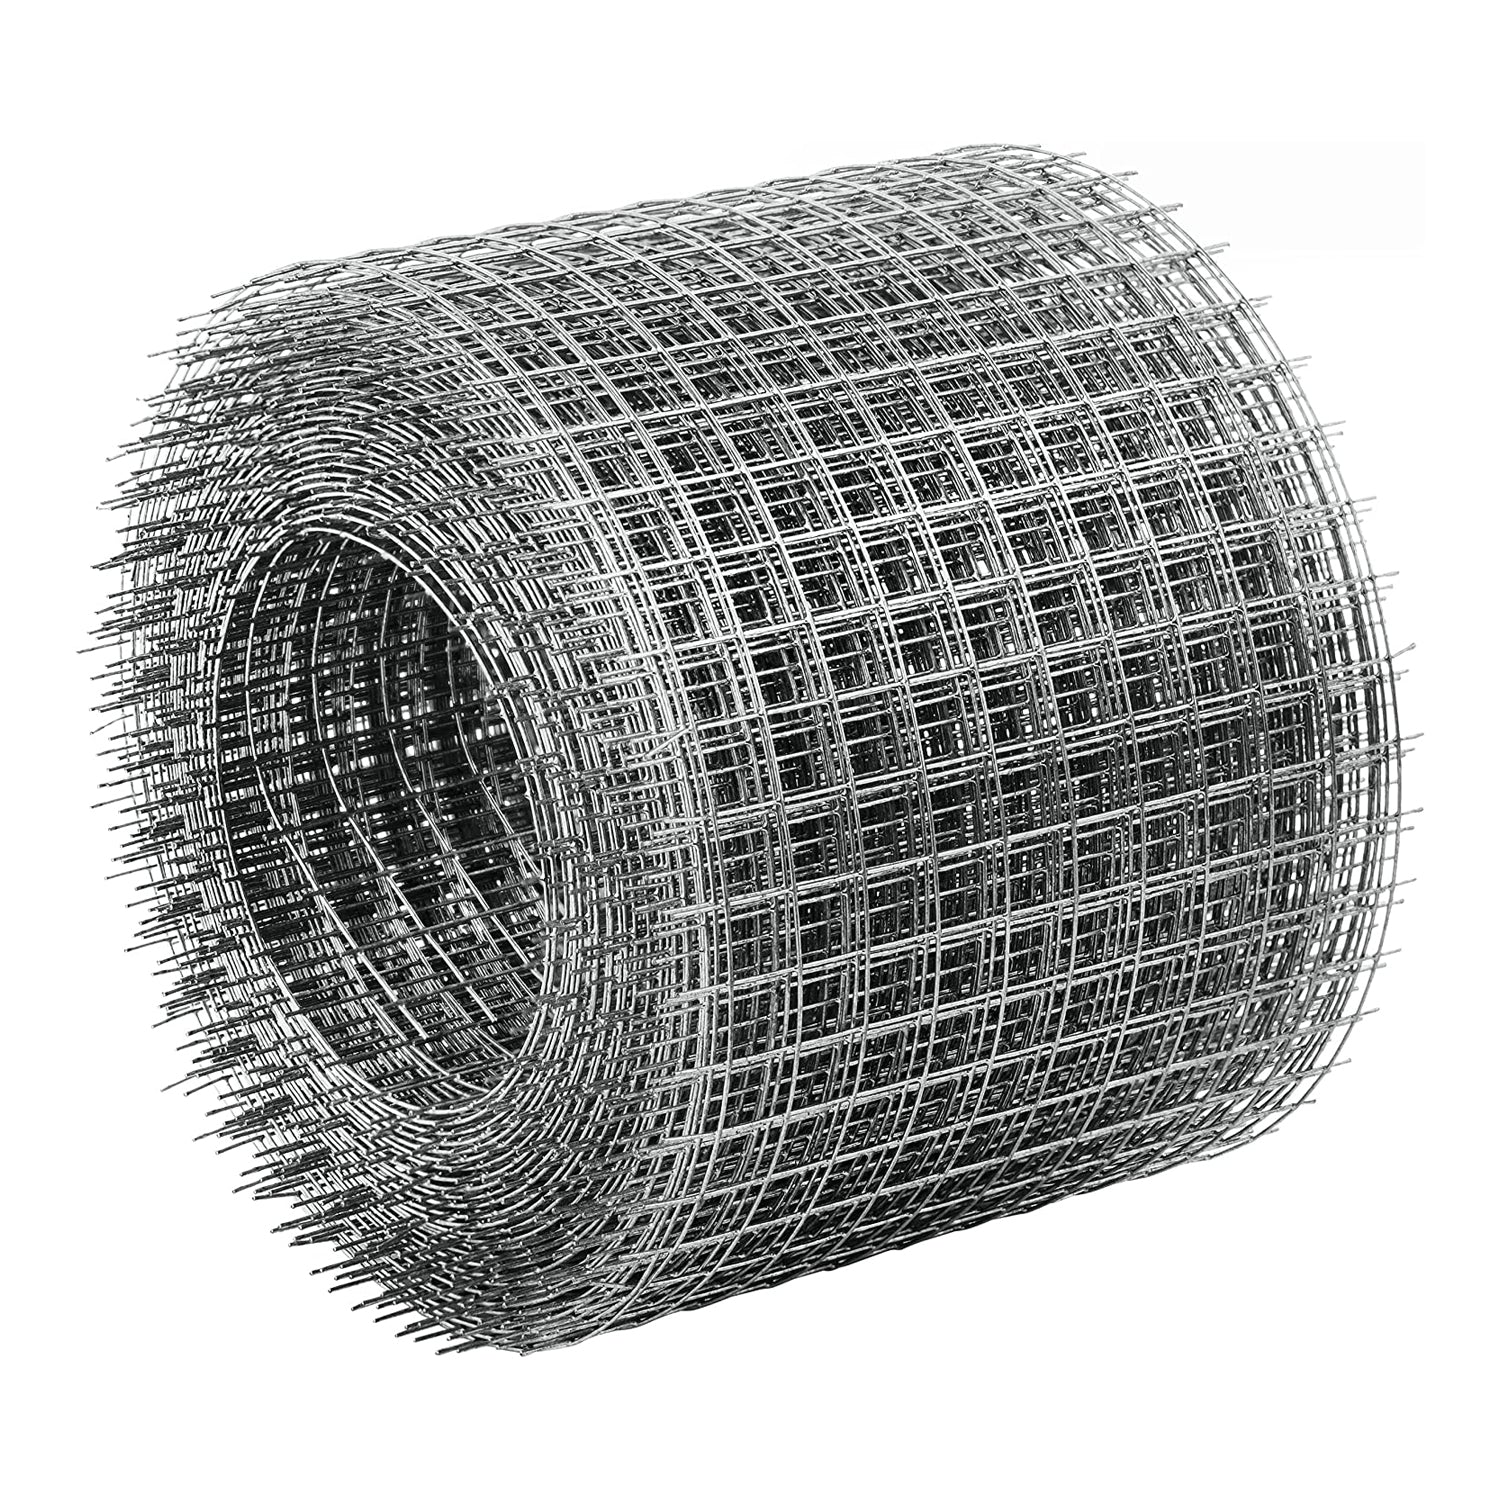 Ratkil Rat Mesh - Rodent Proofing Wire Metal Mesh to Block Rats, Mice & Squirrels | 6m x 75mm